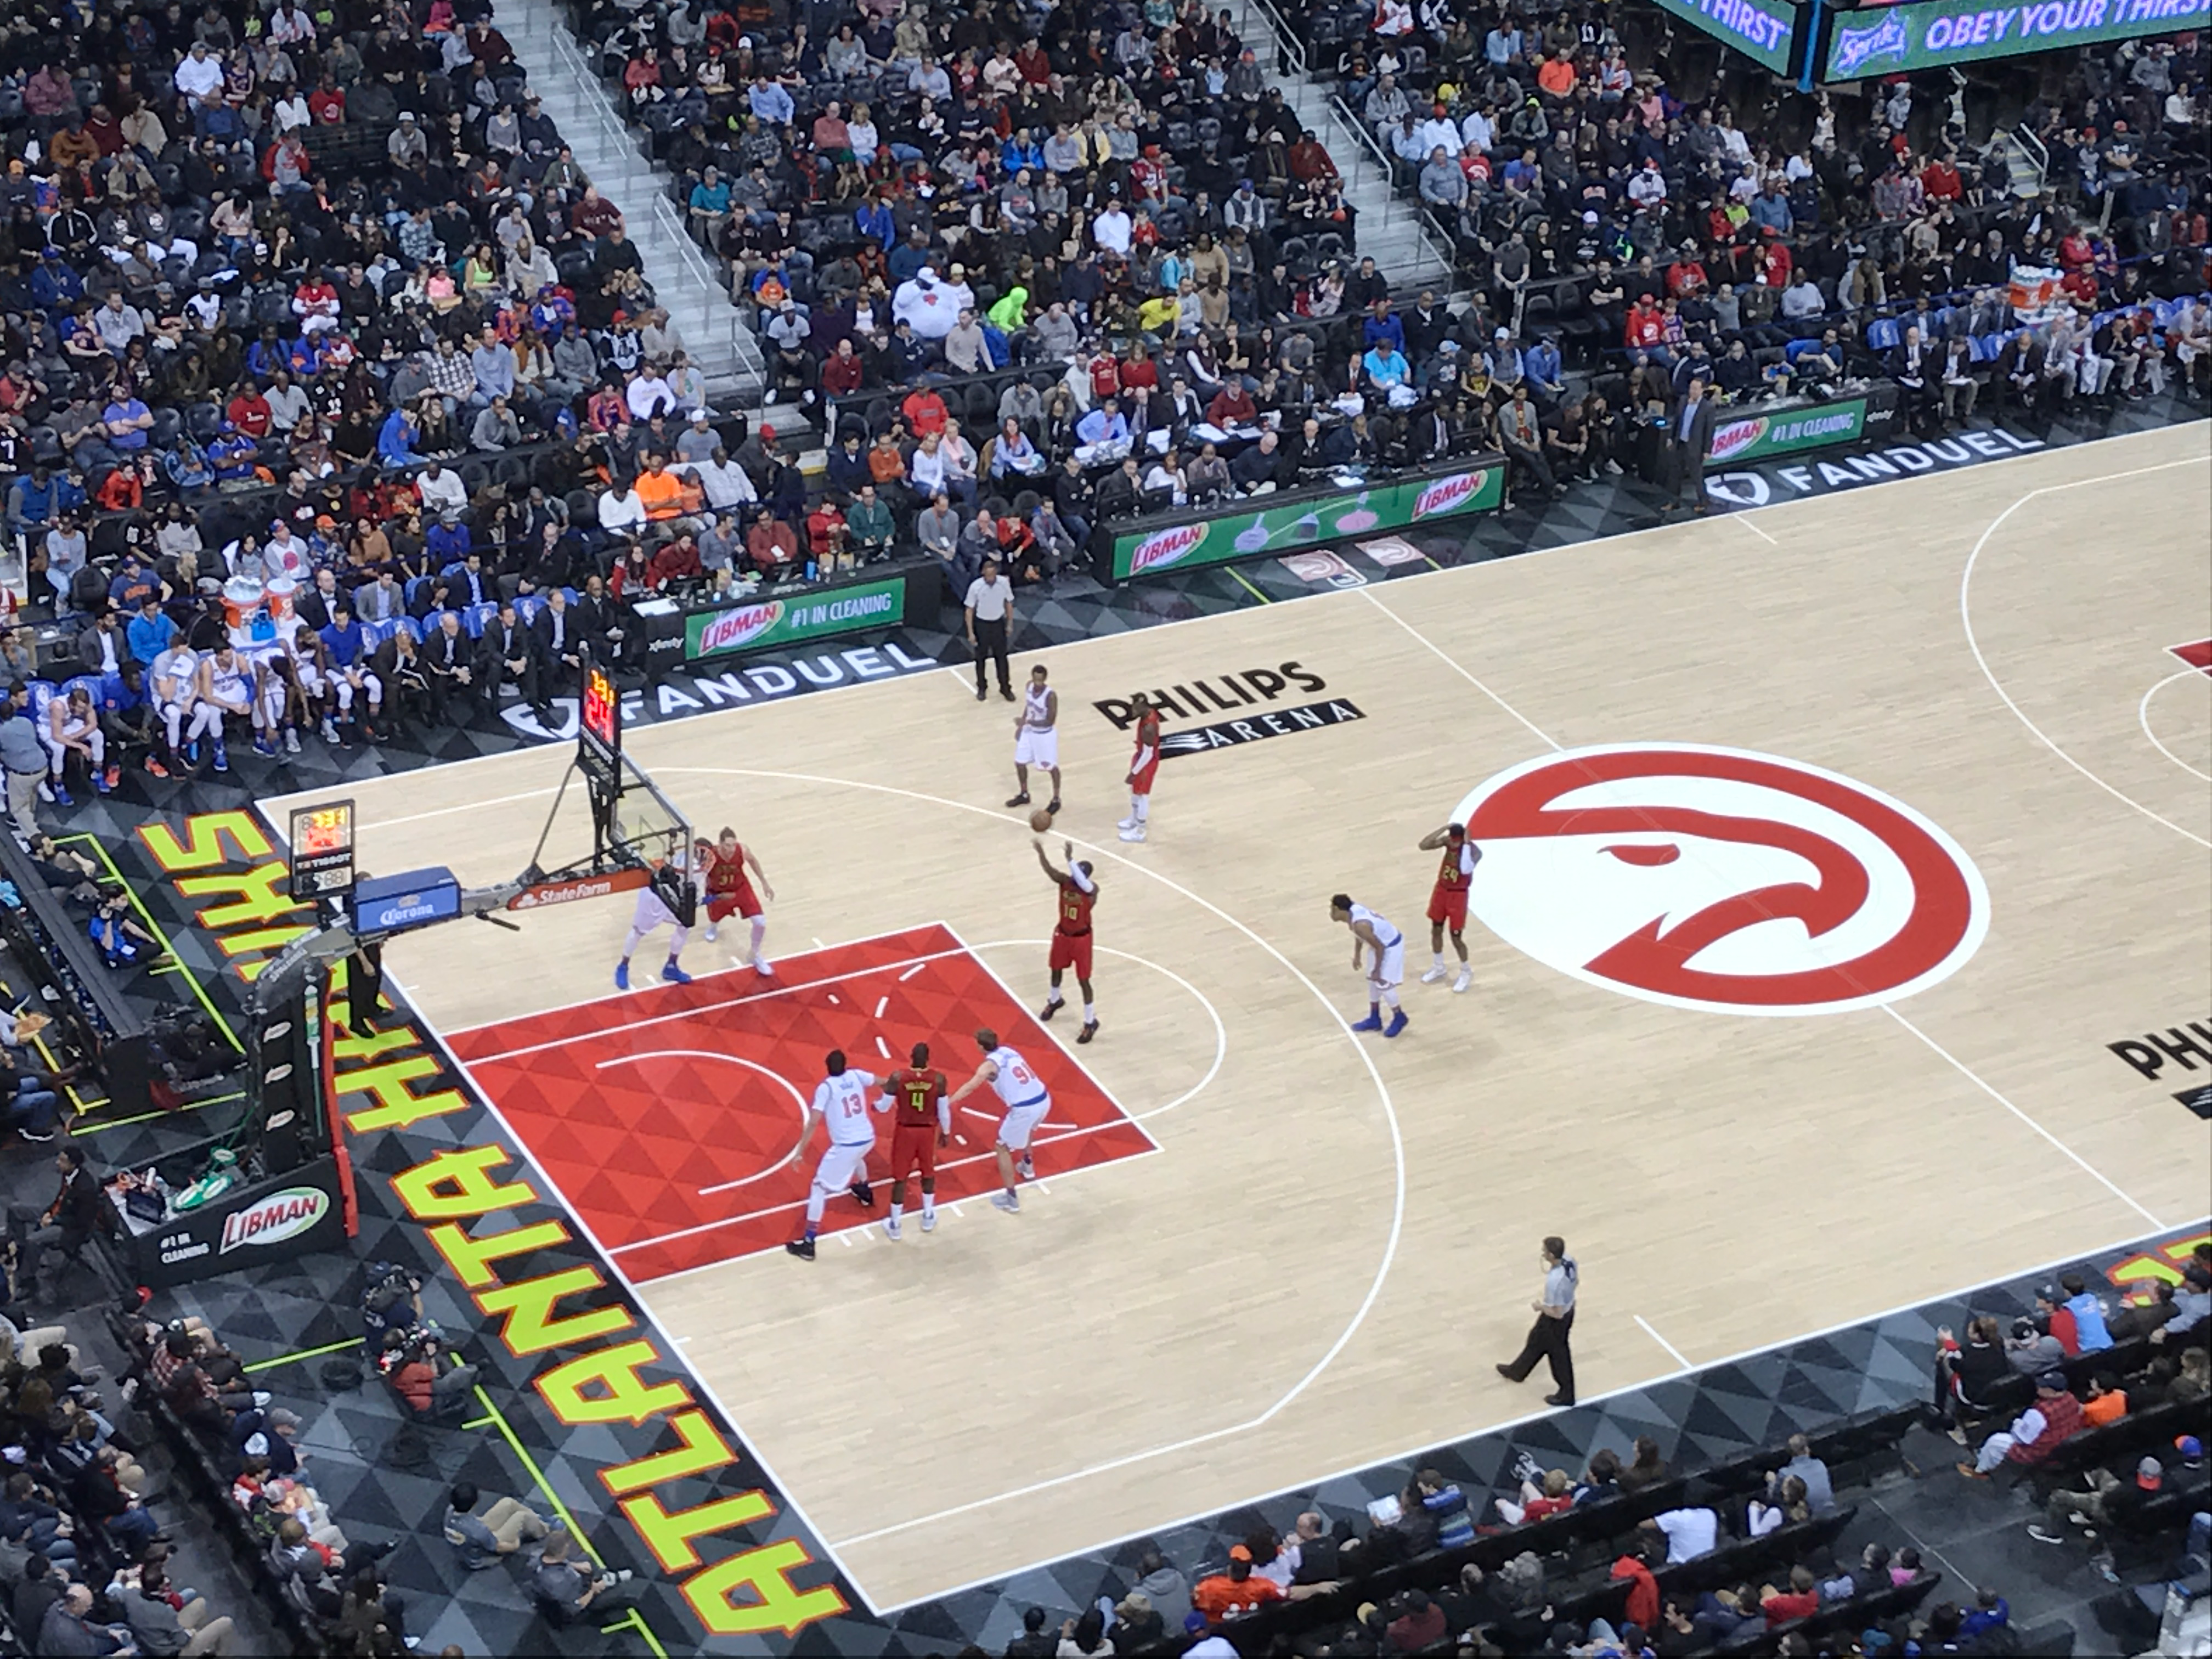 Hawks SG Tim Hardaway Jr. steps up to the line to take a free throw. Hardaway's 19 points often came at big moments in the Hawk's dramatic win.